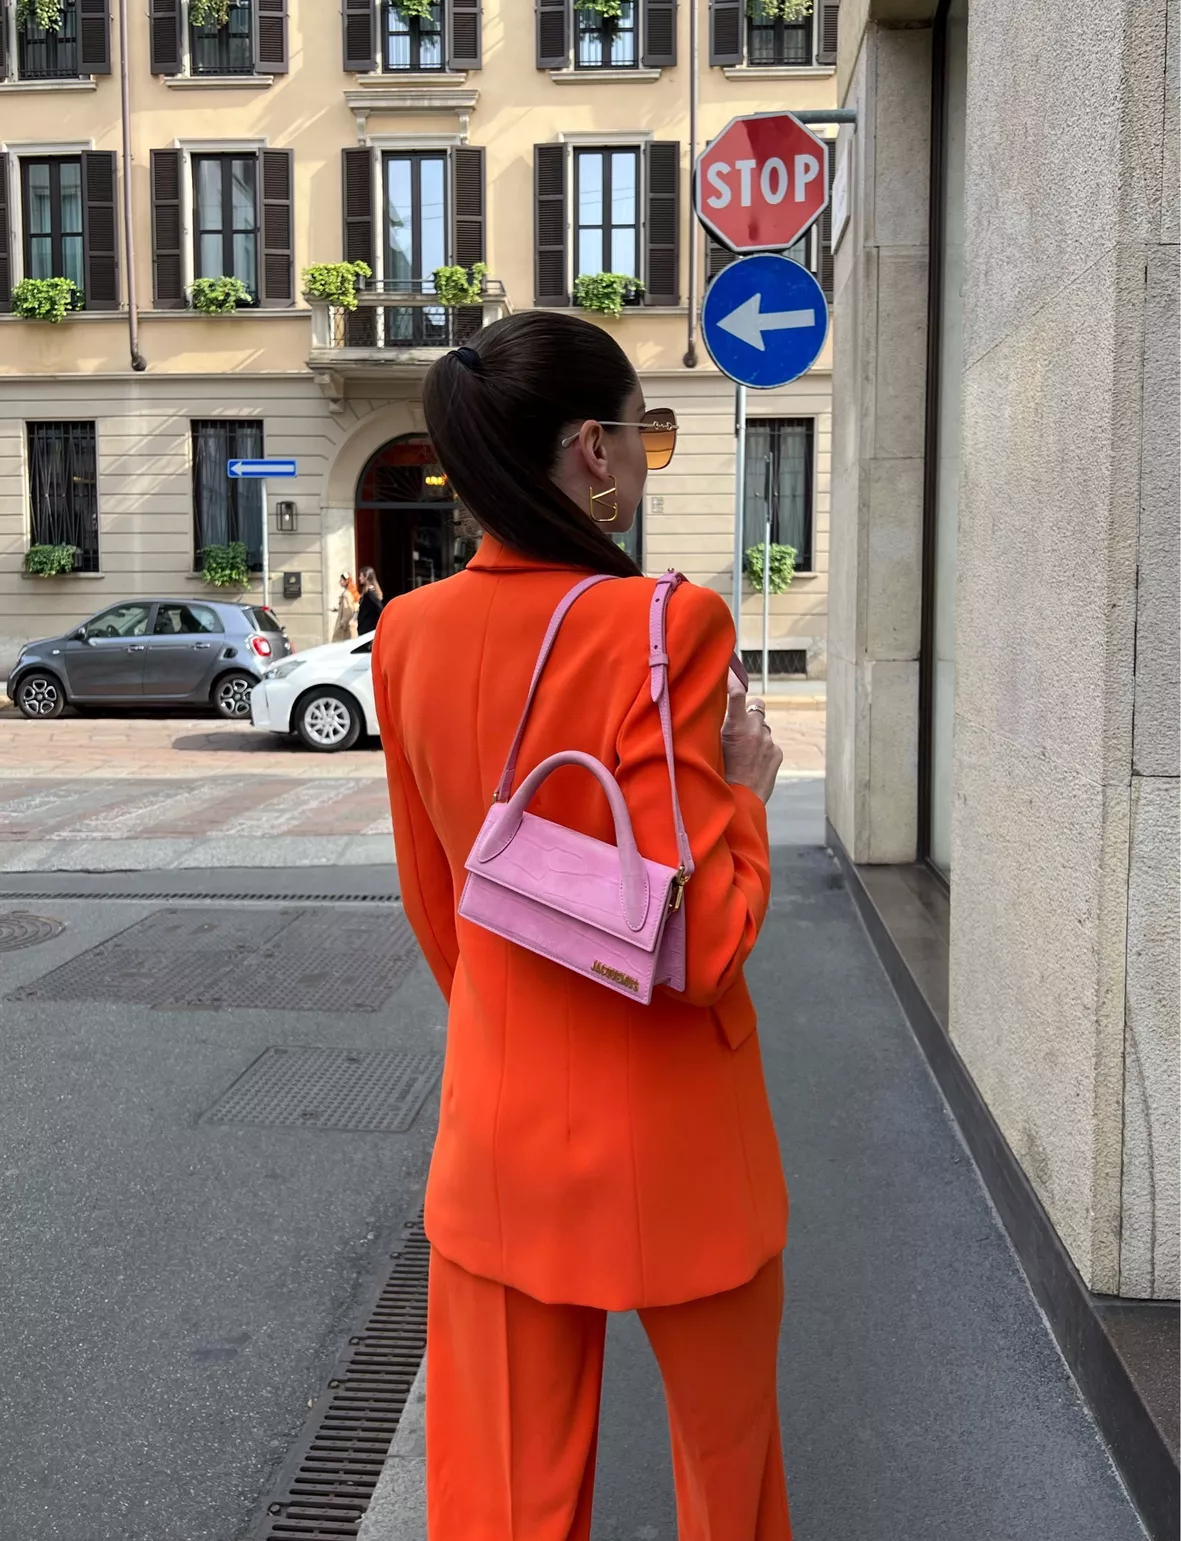 Le Chiquito Long Bag - Jacquemus - Pink - Leather